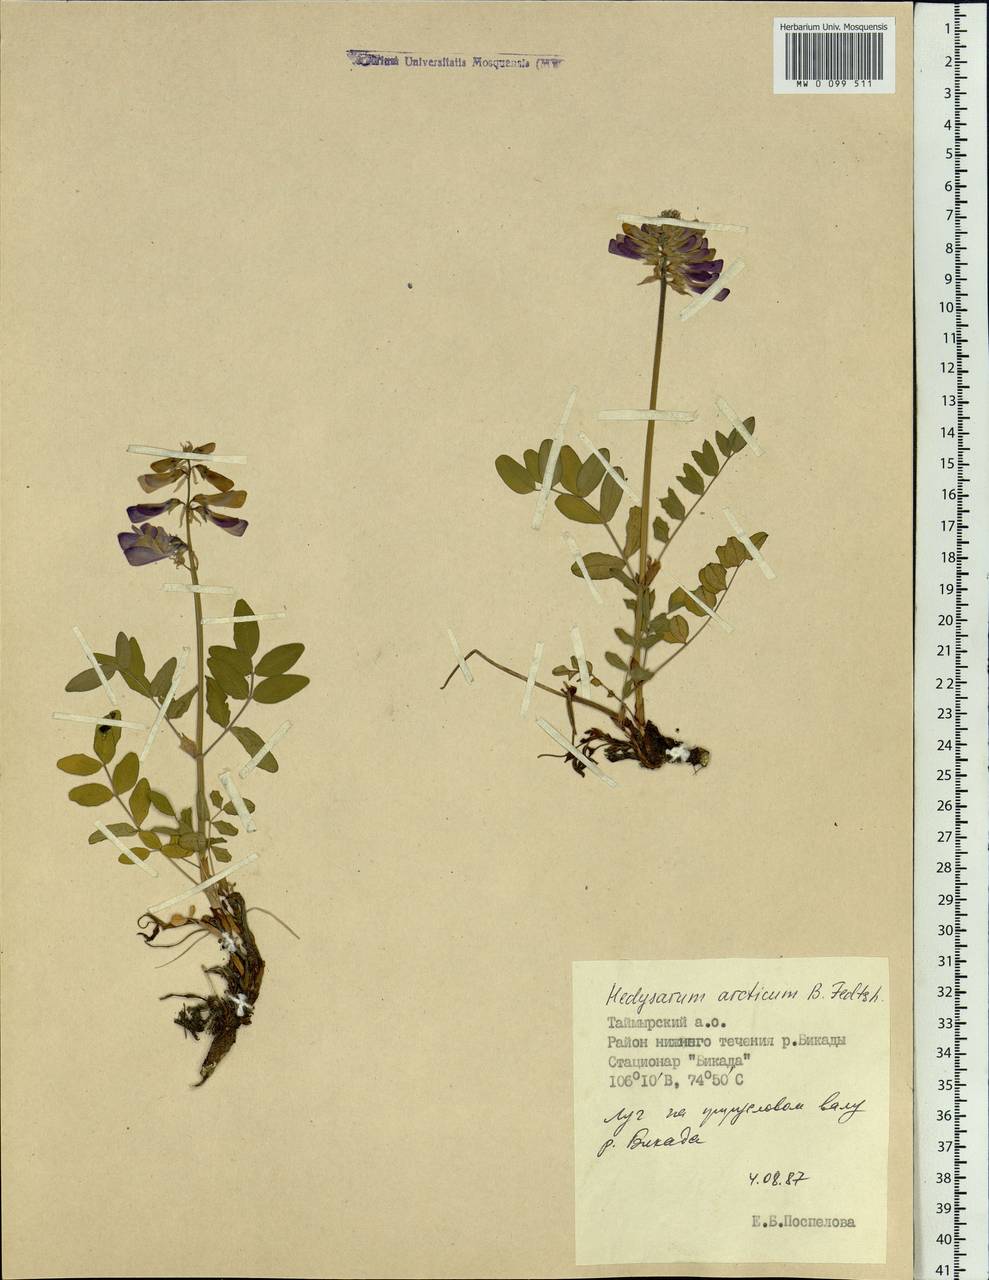 Hedysarum hedysaroides subsp. arcticum (B.Fedtsch.) P.W.Ball, Siberia, Central Siberia (S3) (Russia)